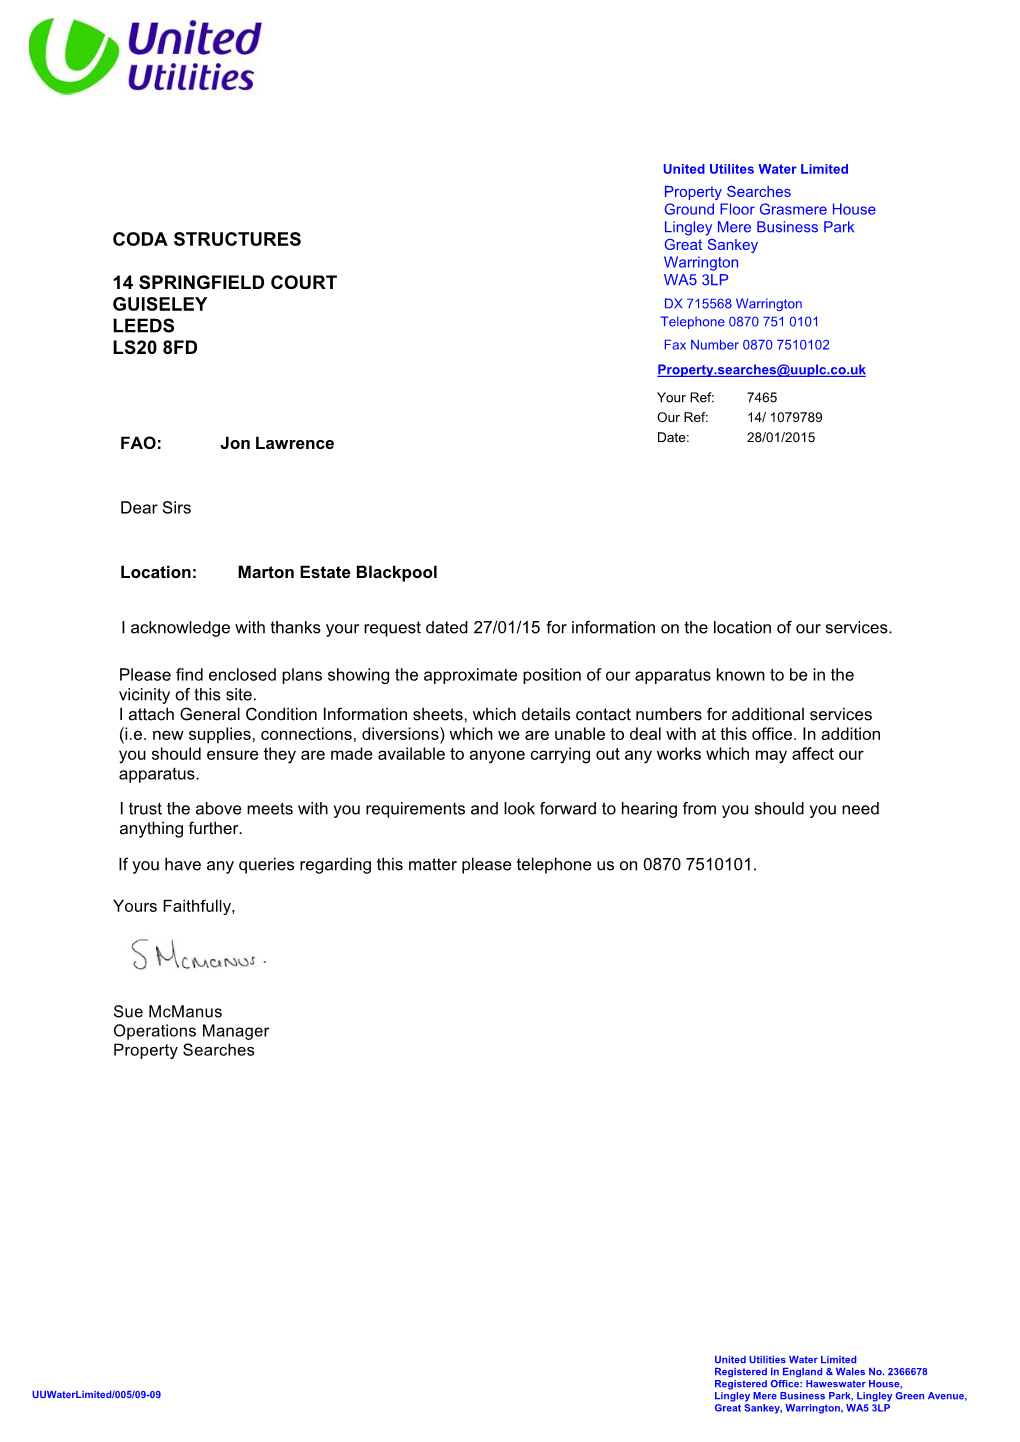 7465 United Utilities Property Search (28 January 2015).Pdf